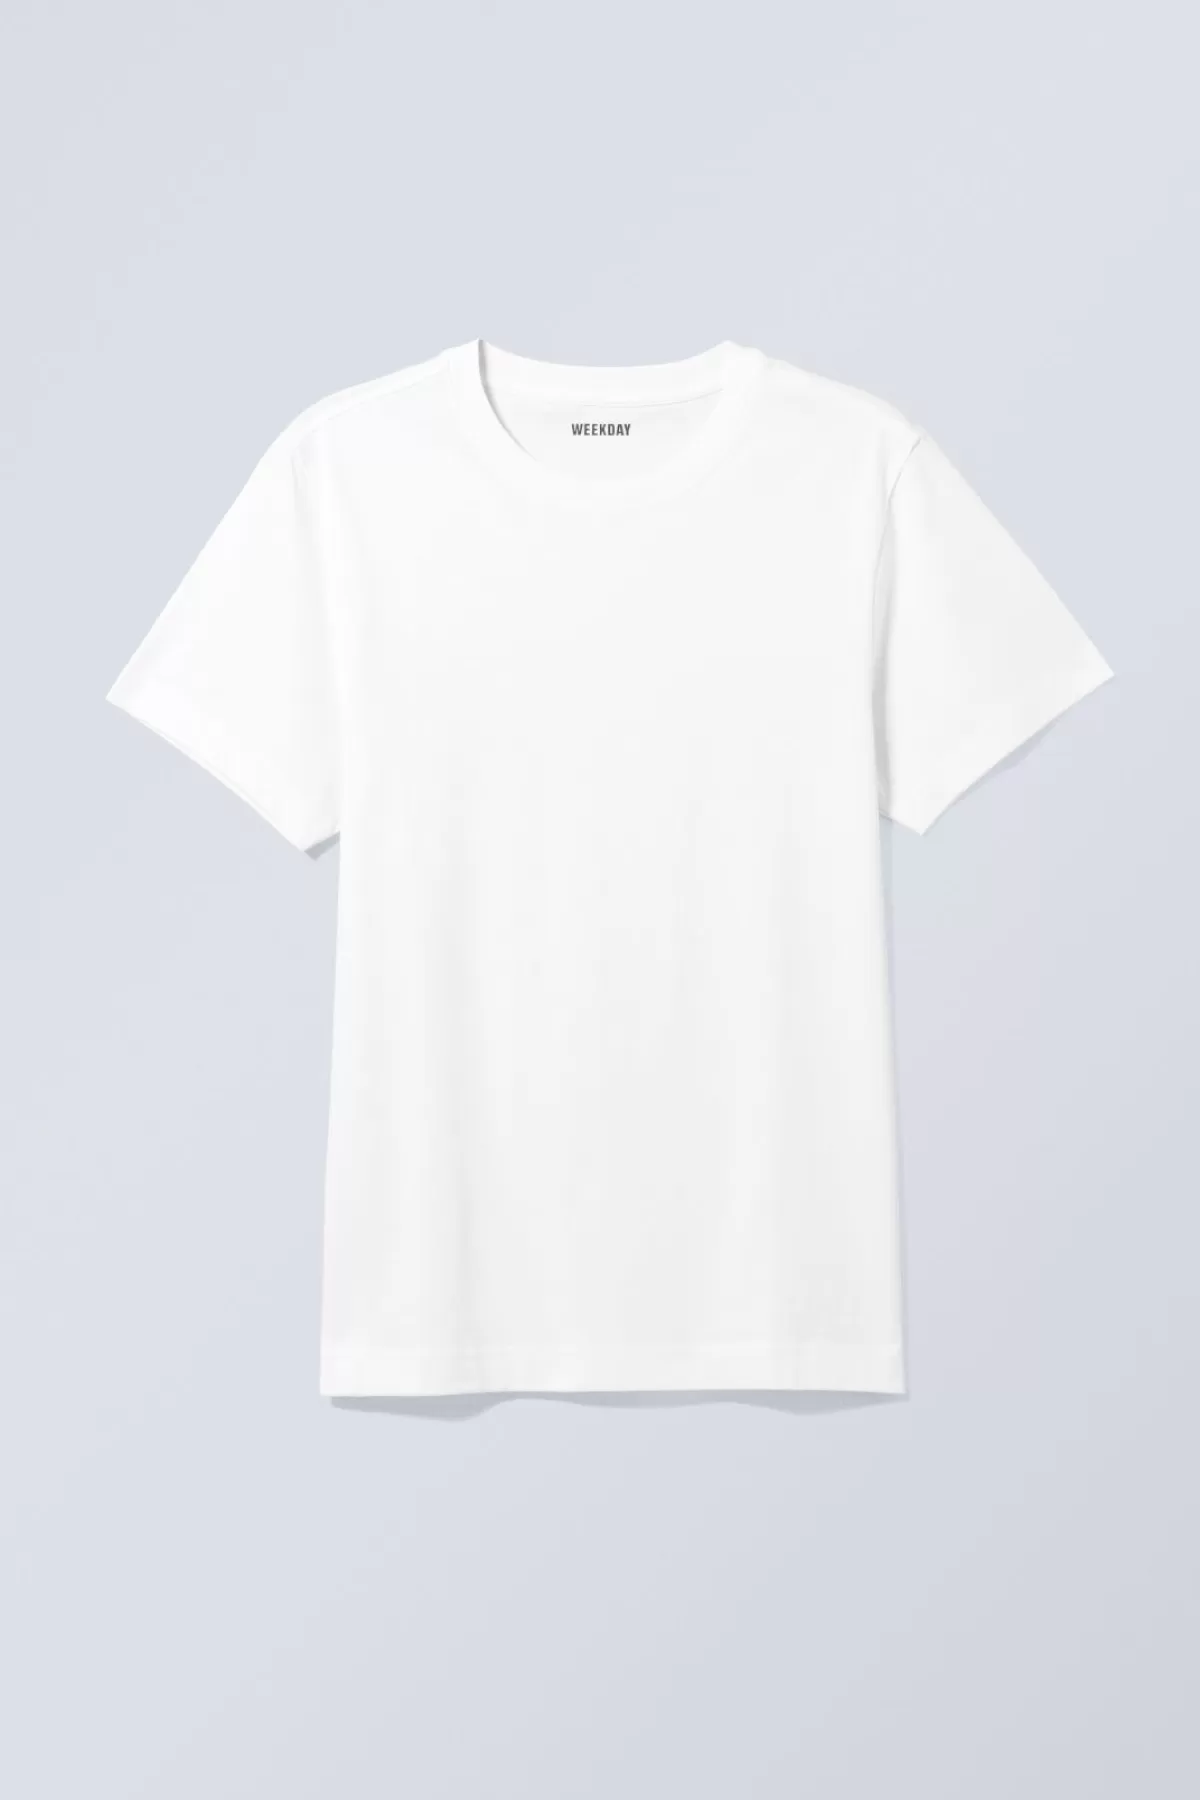 Weekday Standard Midweight T- shirt Clearance